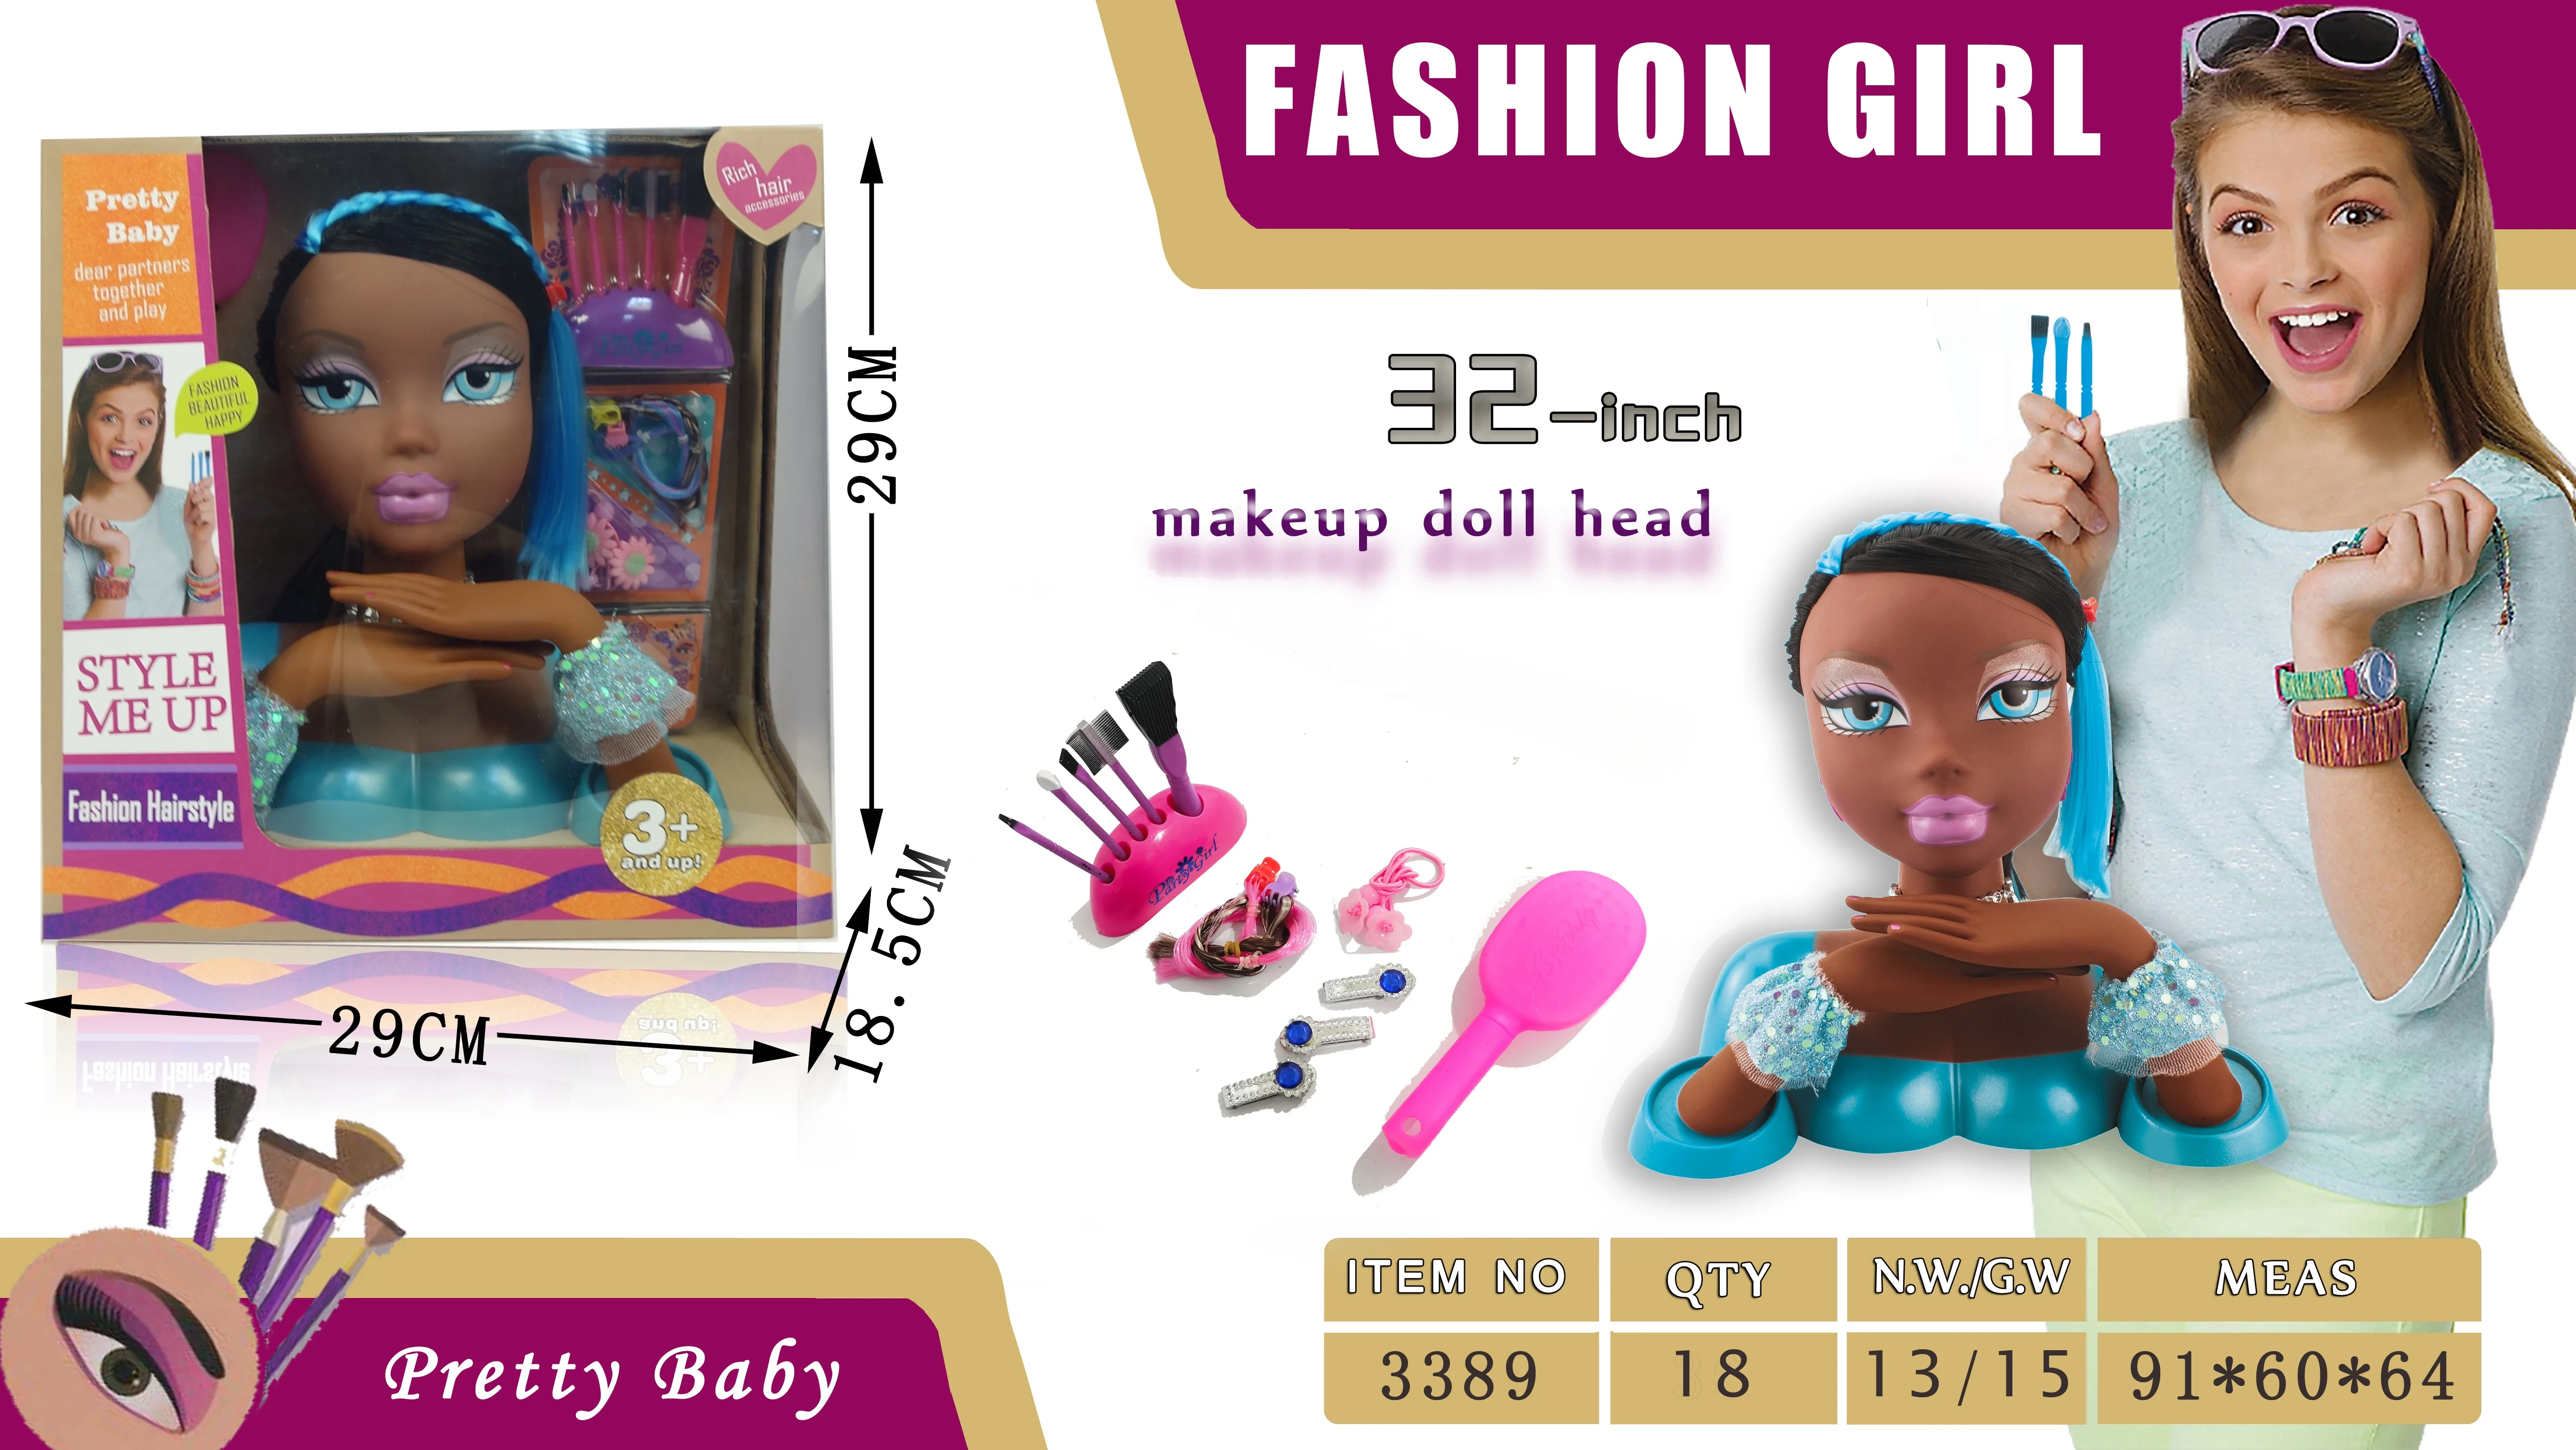 32 inch fashion hairstyle makeup doll